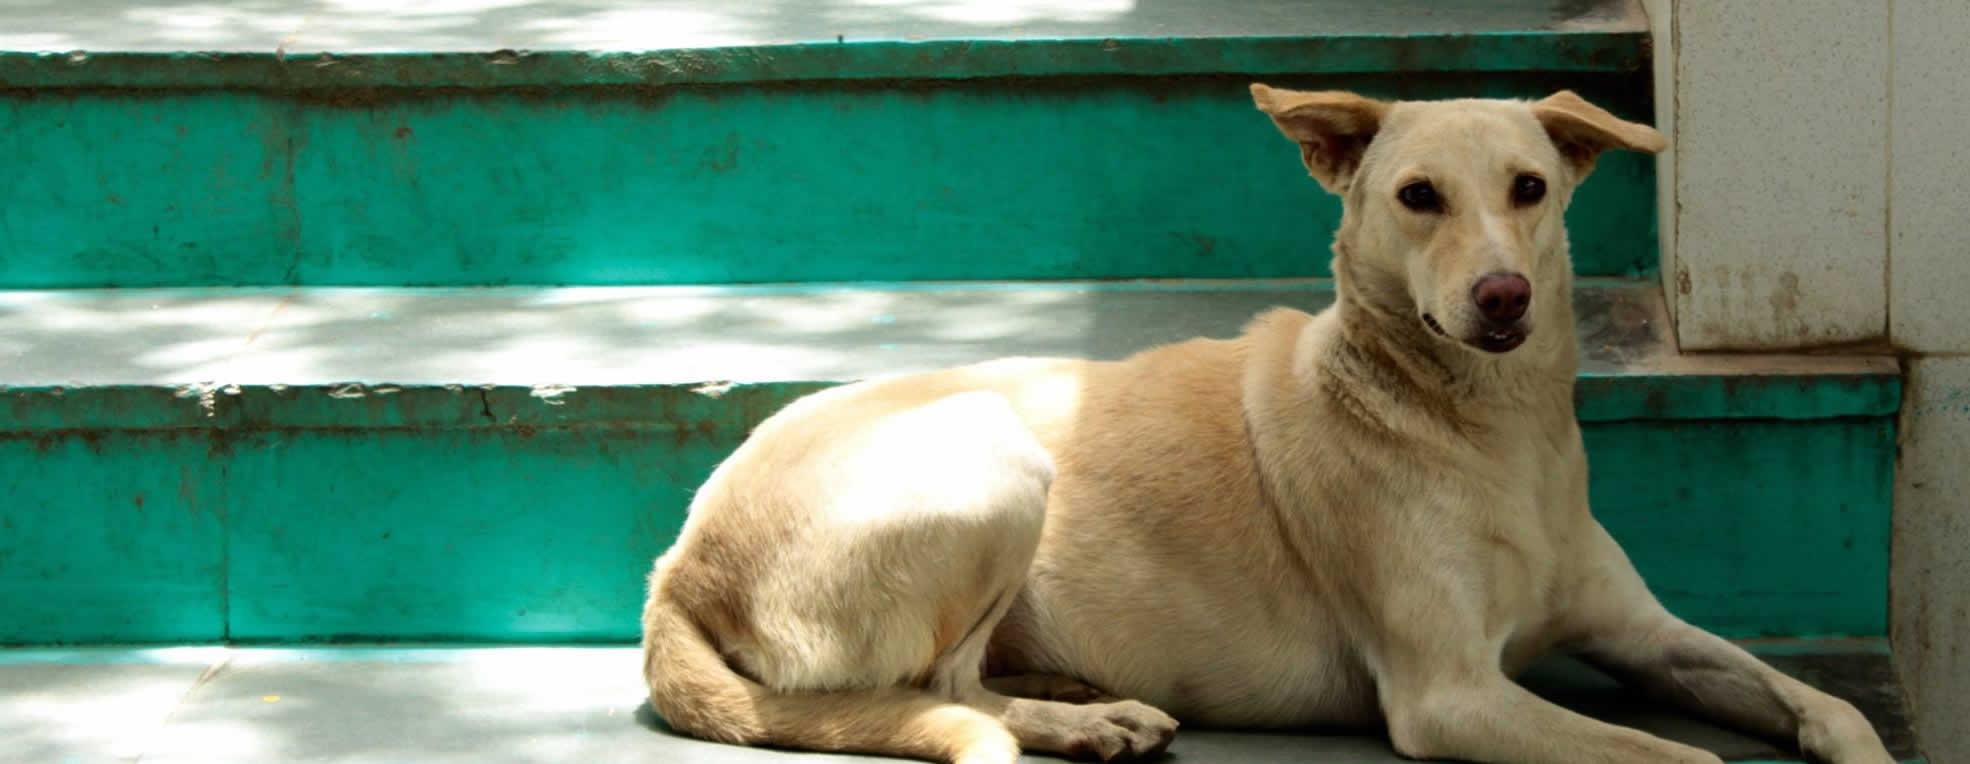 Welcome to PAWS - Pet Animal Welfare Society, New Delhi, India